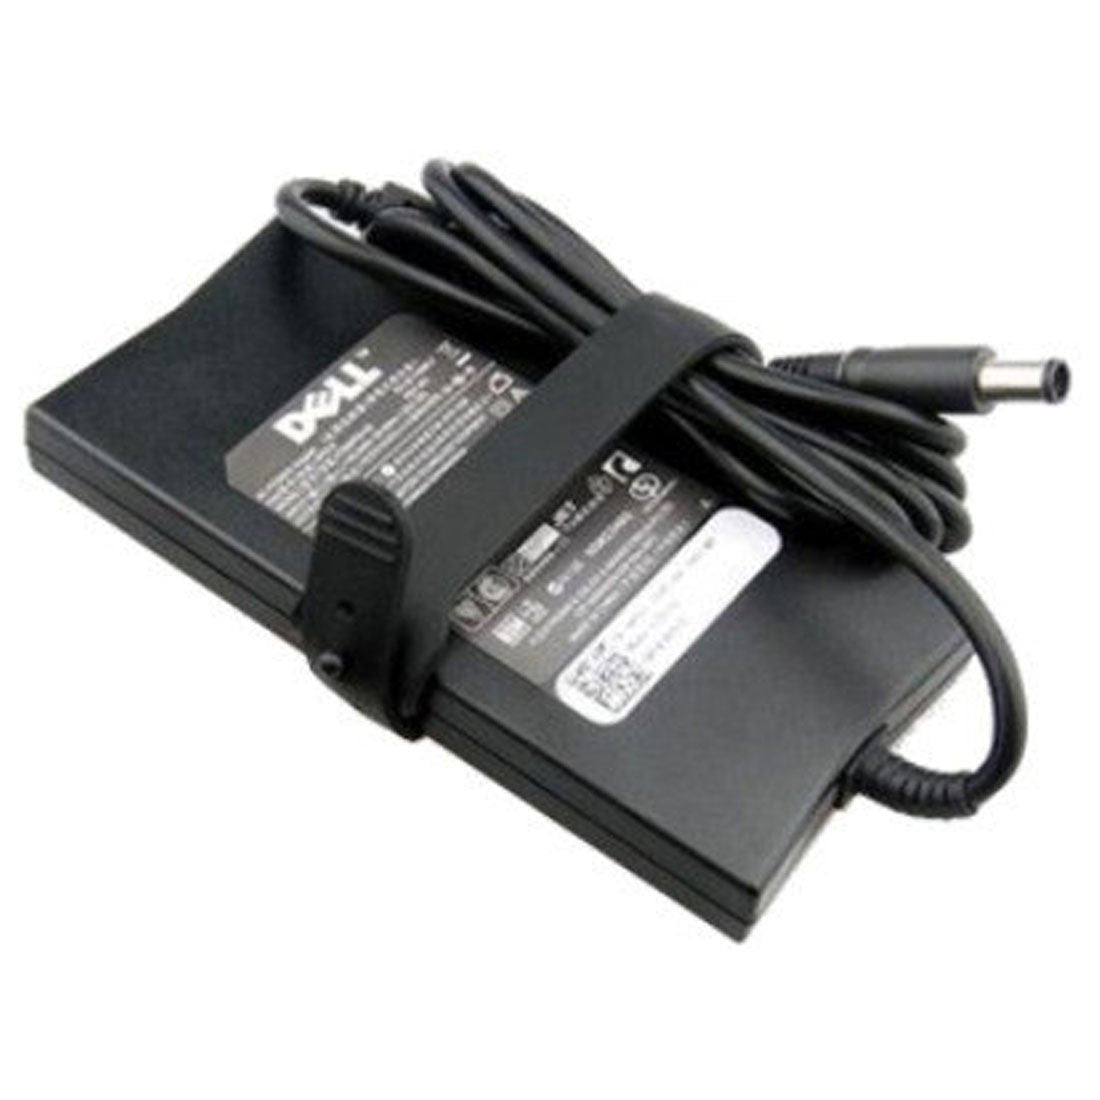 Dell Original 130W 19.5V 7.4mm Pin Laptop Charger Adapter for Precision 3510 With Power Cord